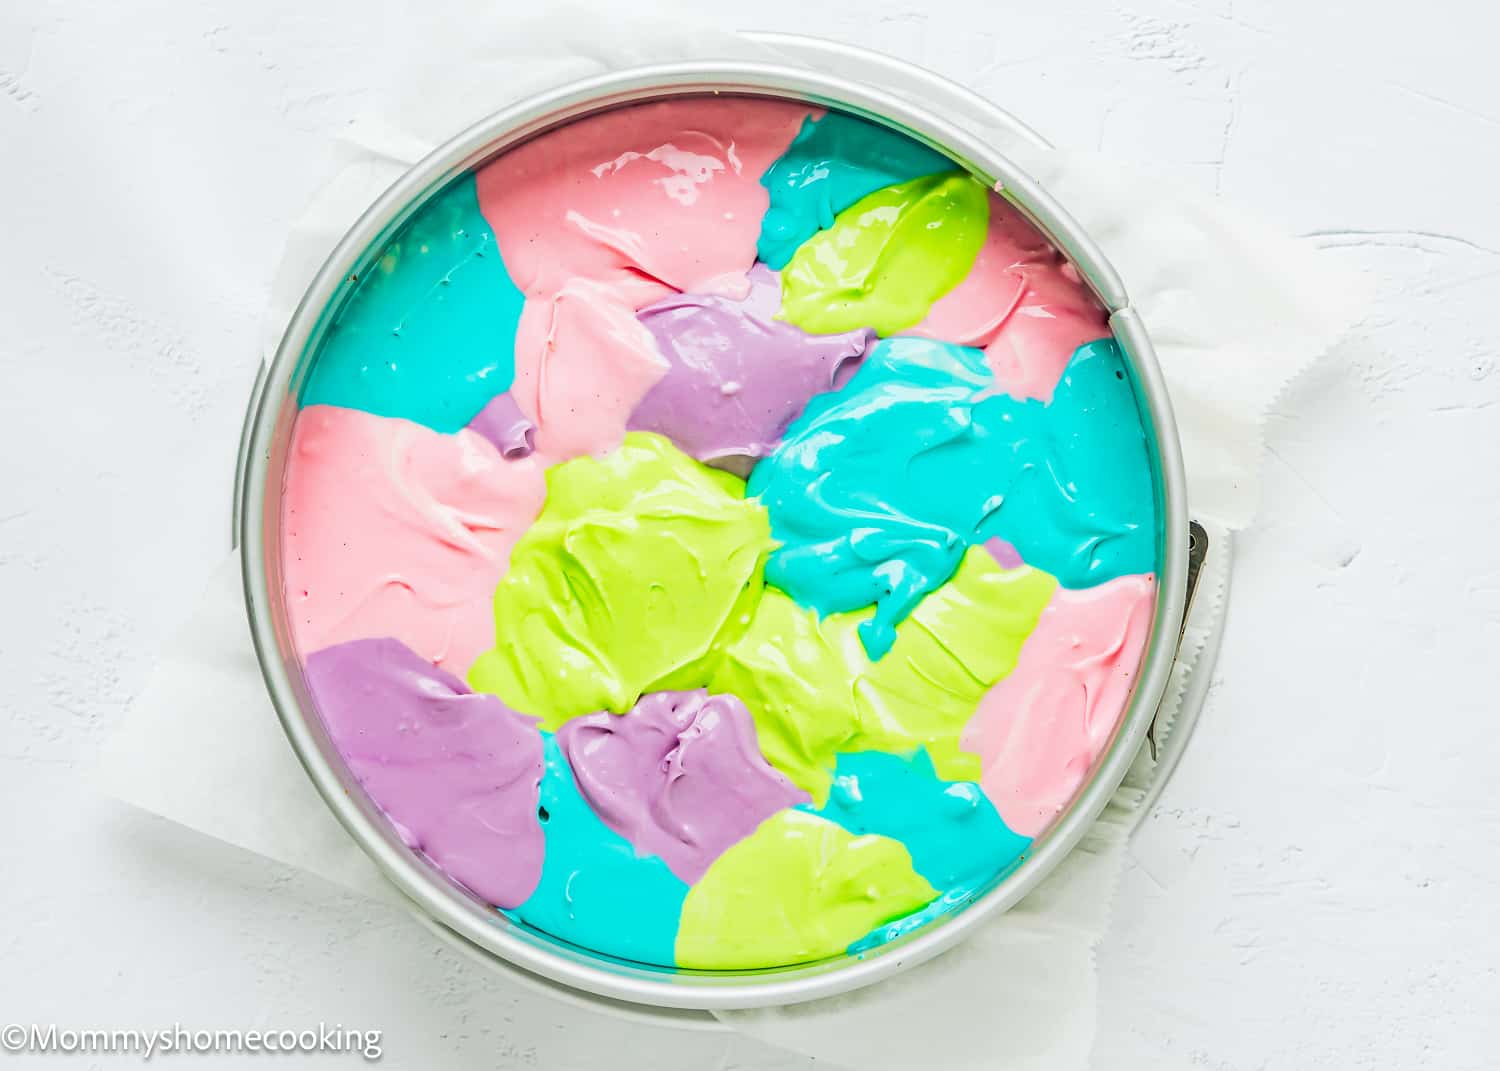 unbaked colorful cheesecake in a springform pan.